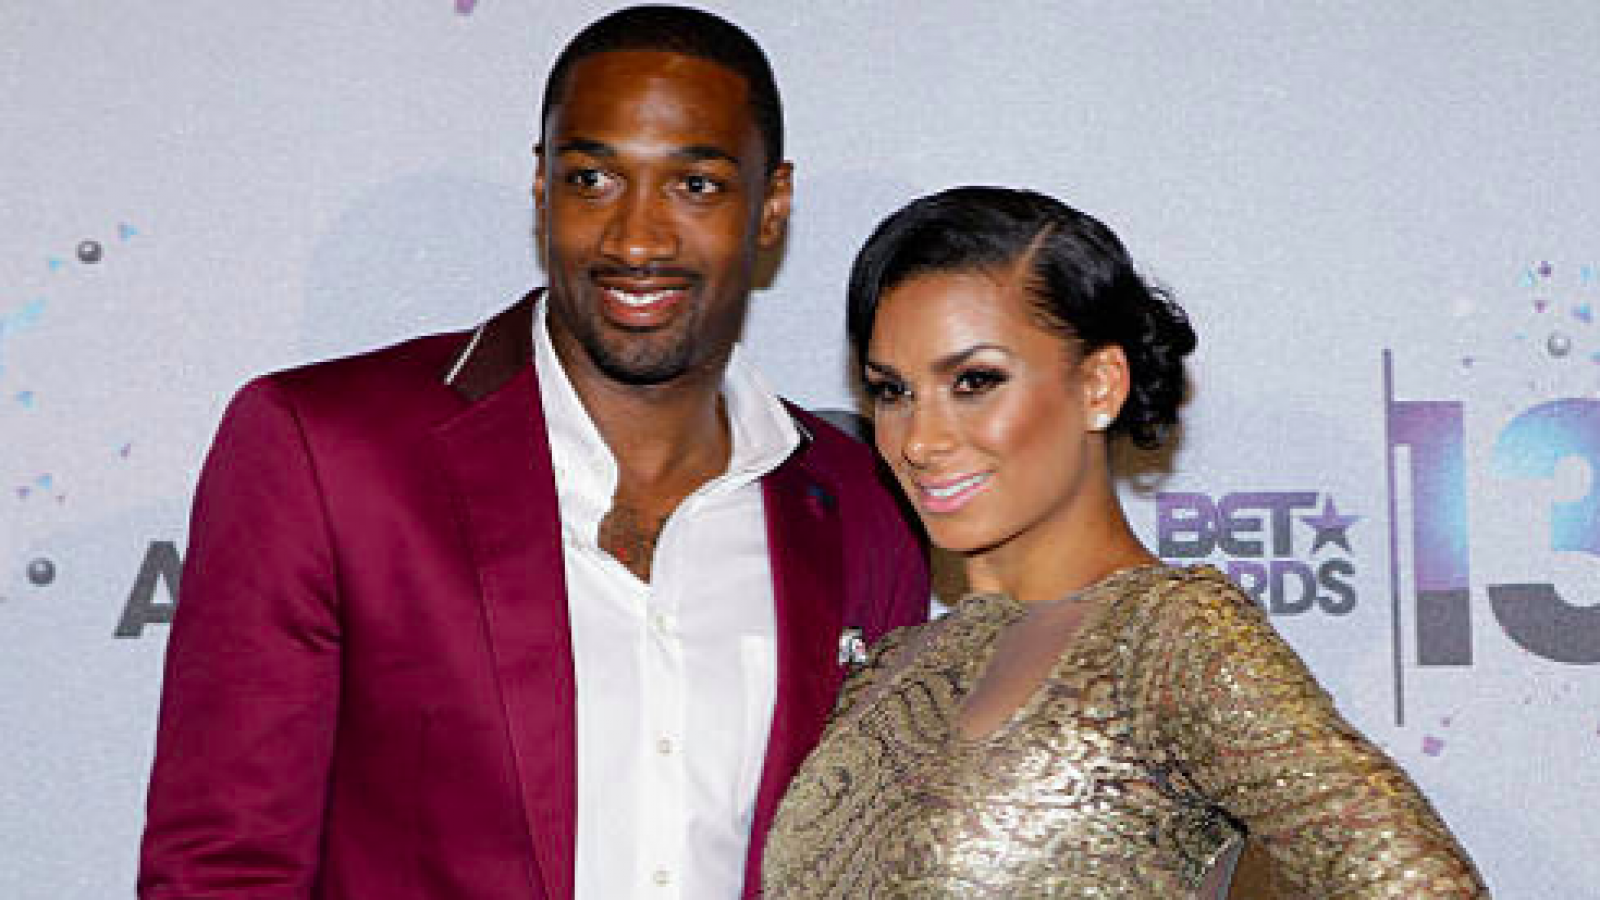 Gilbert Arenas Reveals How He Switched The $400K Diamond Ring He Gave His Ex Laura Govan With A Fake One